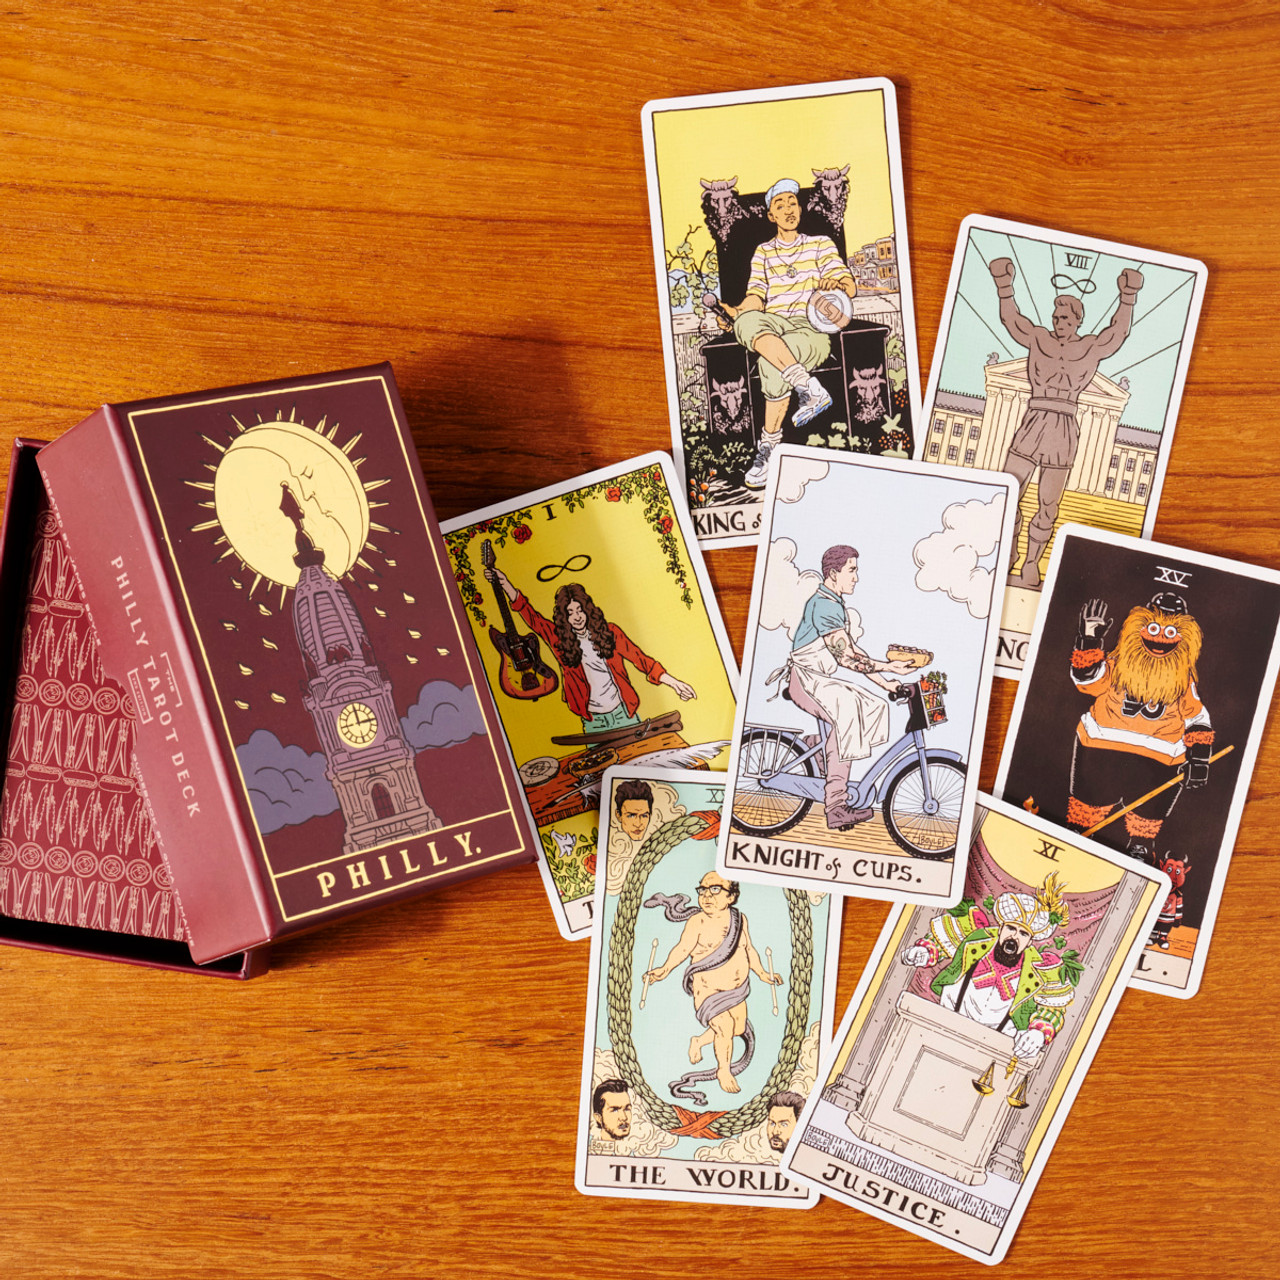 Print Your Own Tarot Stickers and Notecards